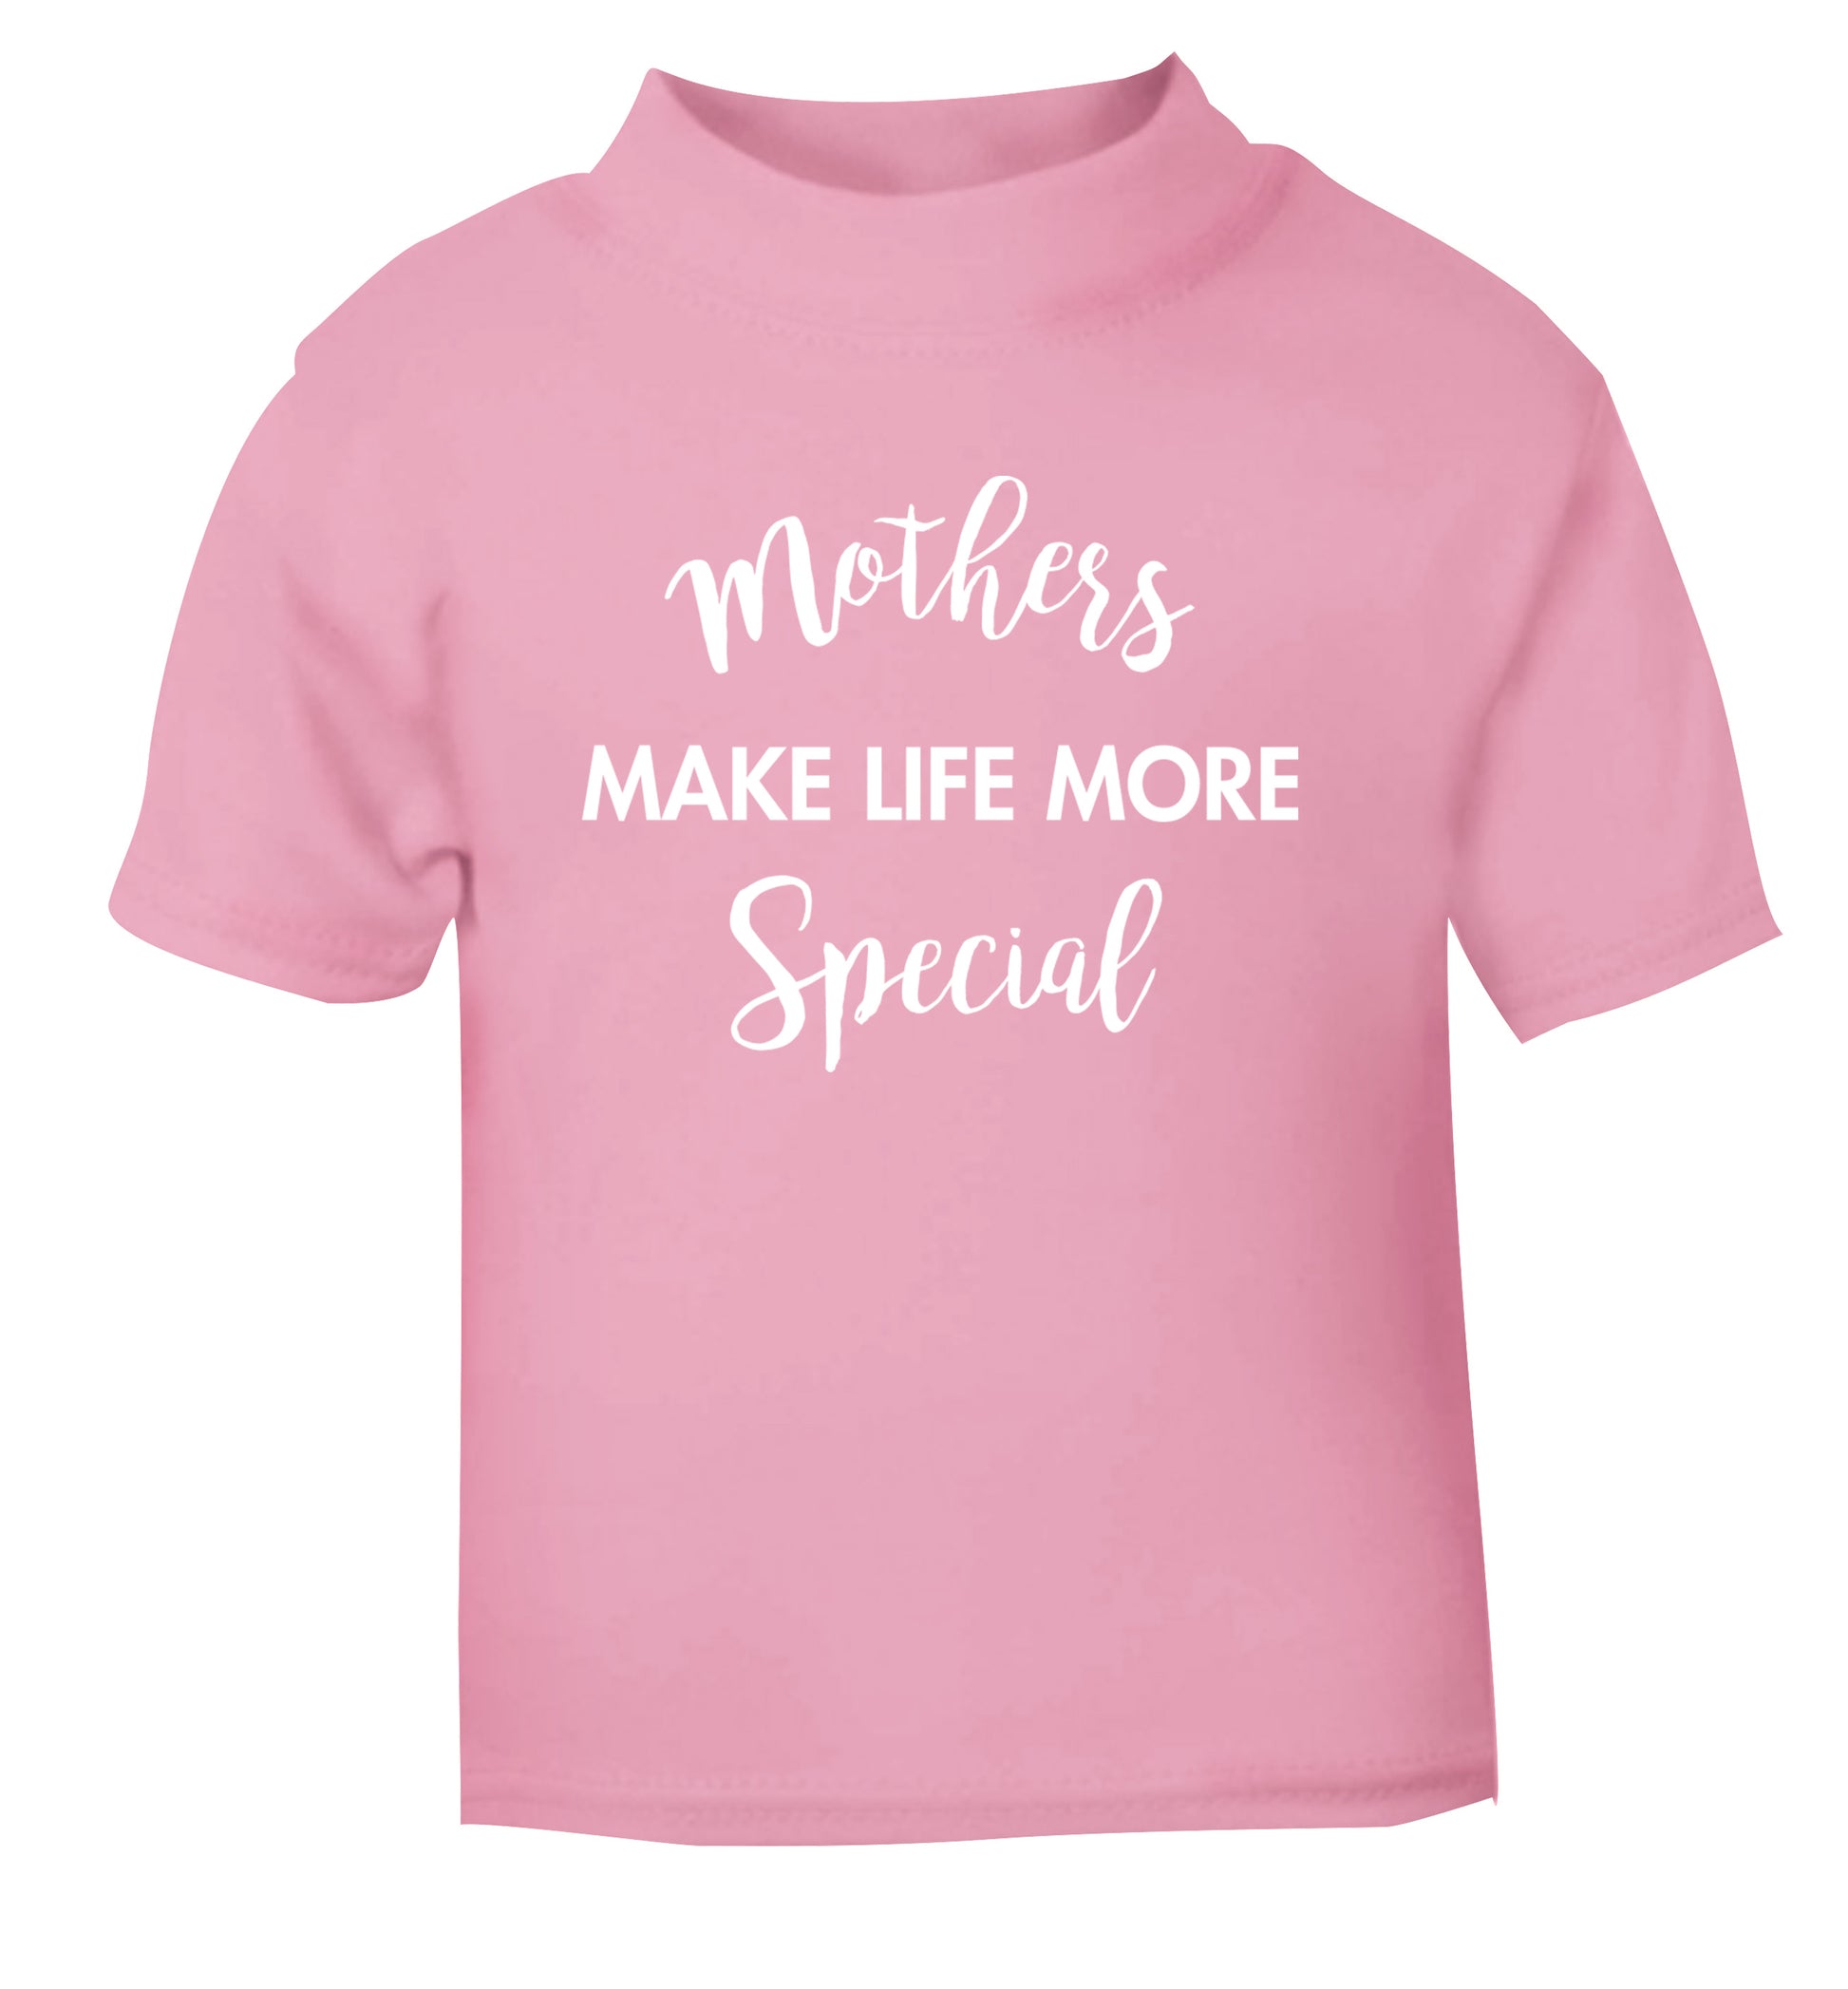 Mother's make life more special light pink baby toddler Tshirt 2 Years